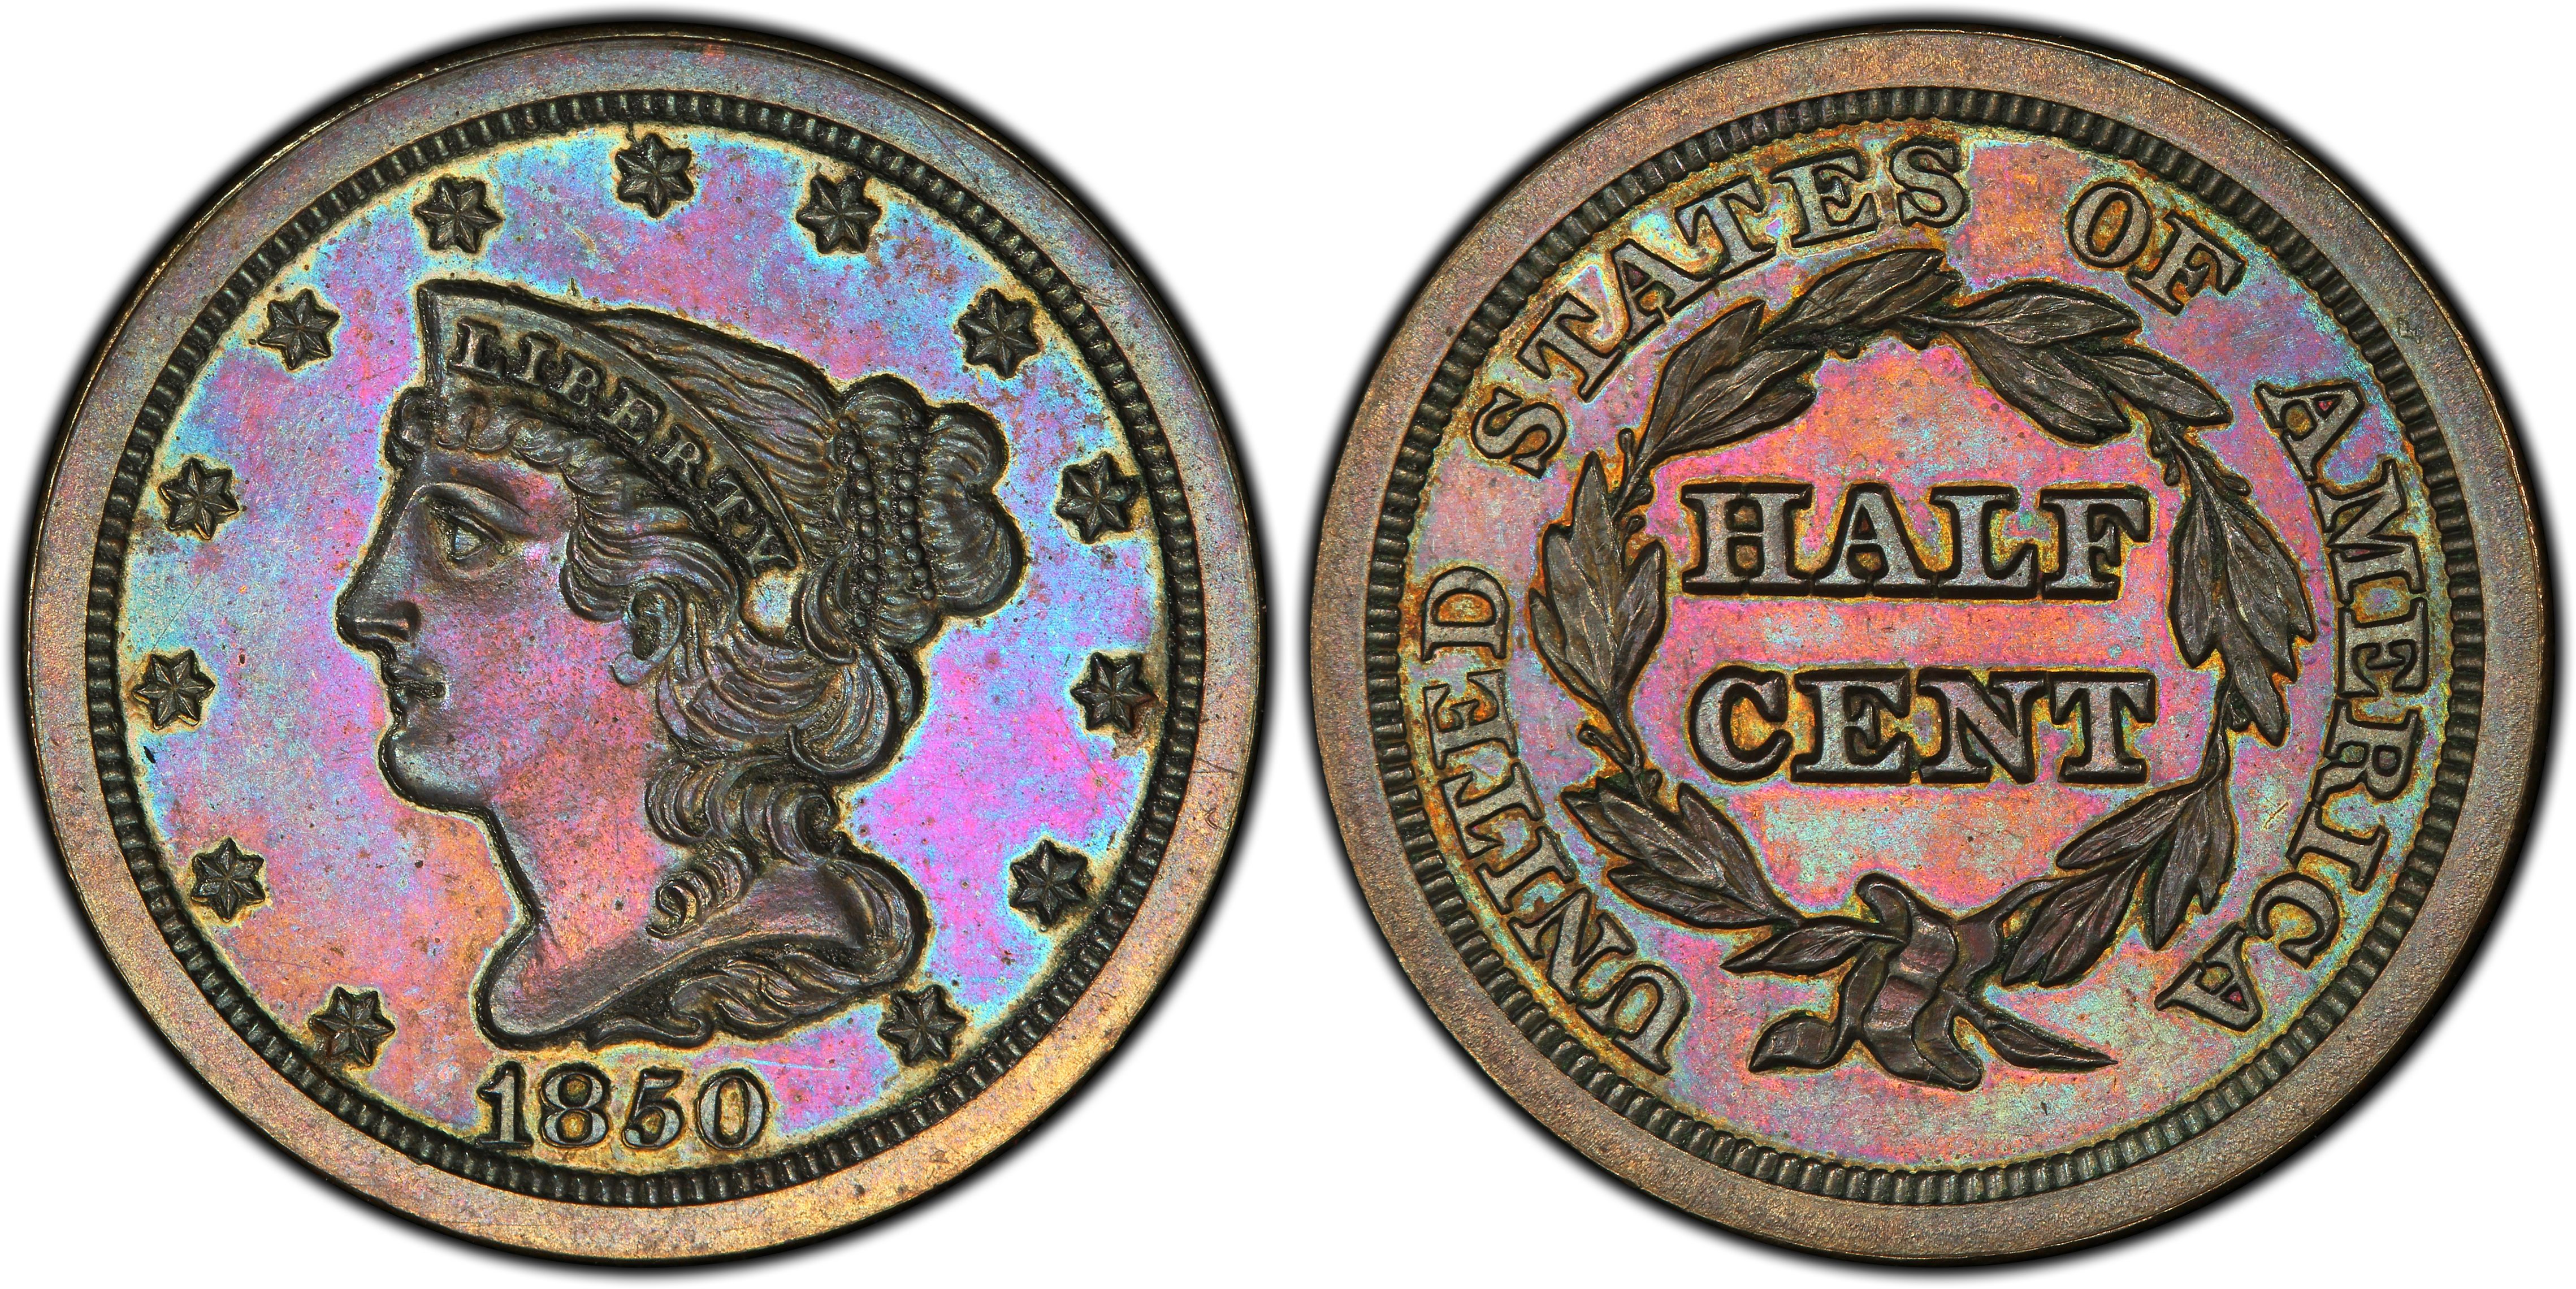 1850 1/2C, BN (Proof) Braided Hair Half Cent - PCGS CoinFacts